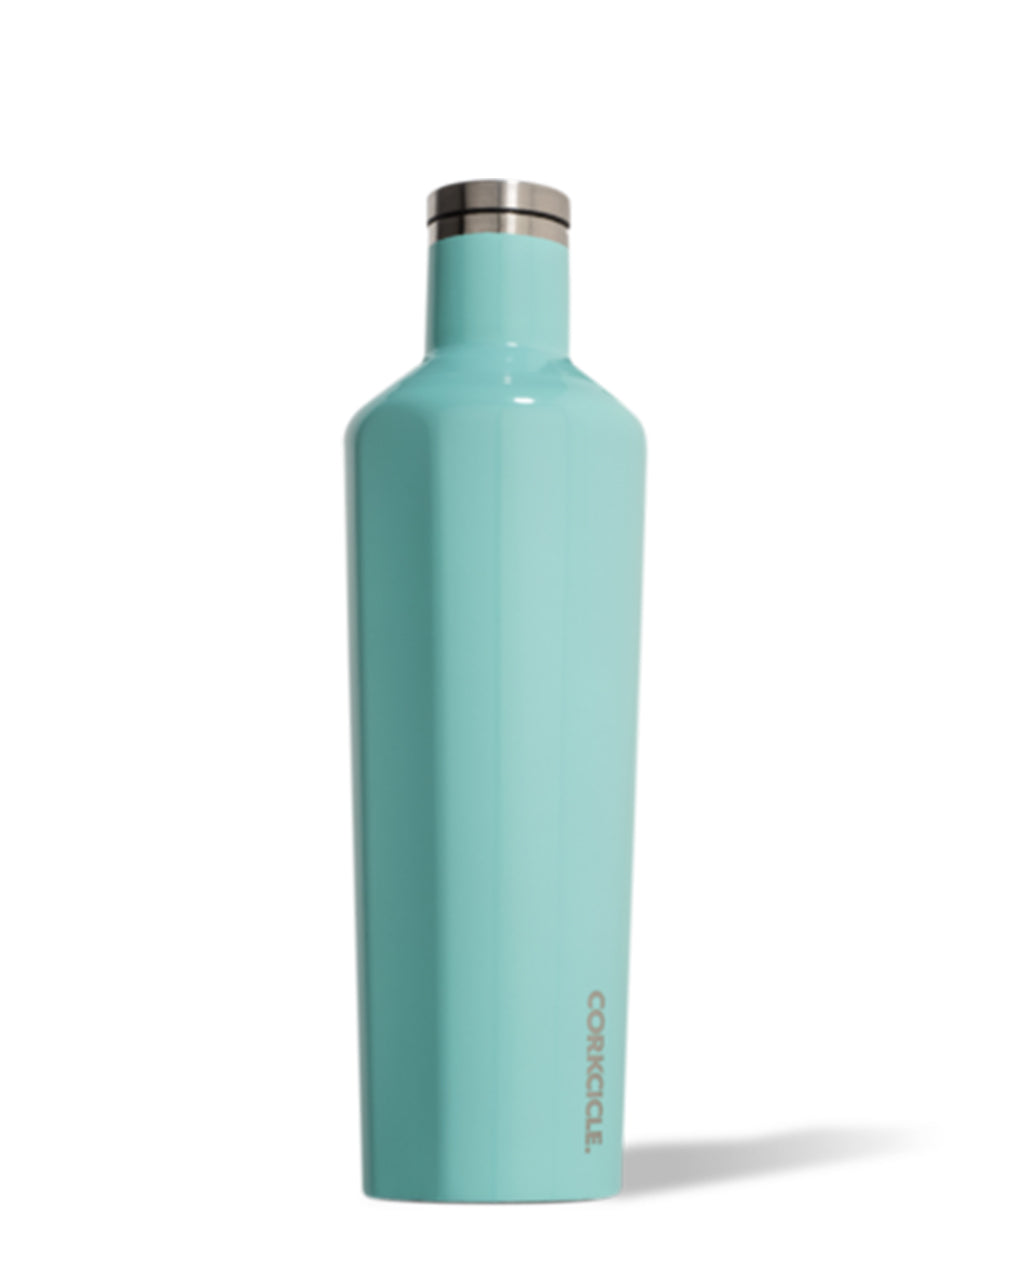 Corkcicle Water Bottle